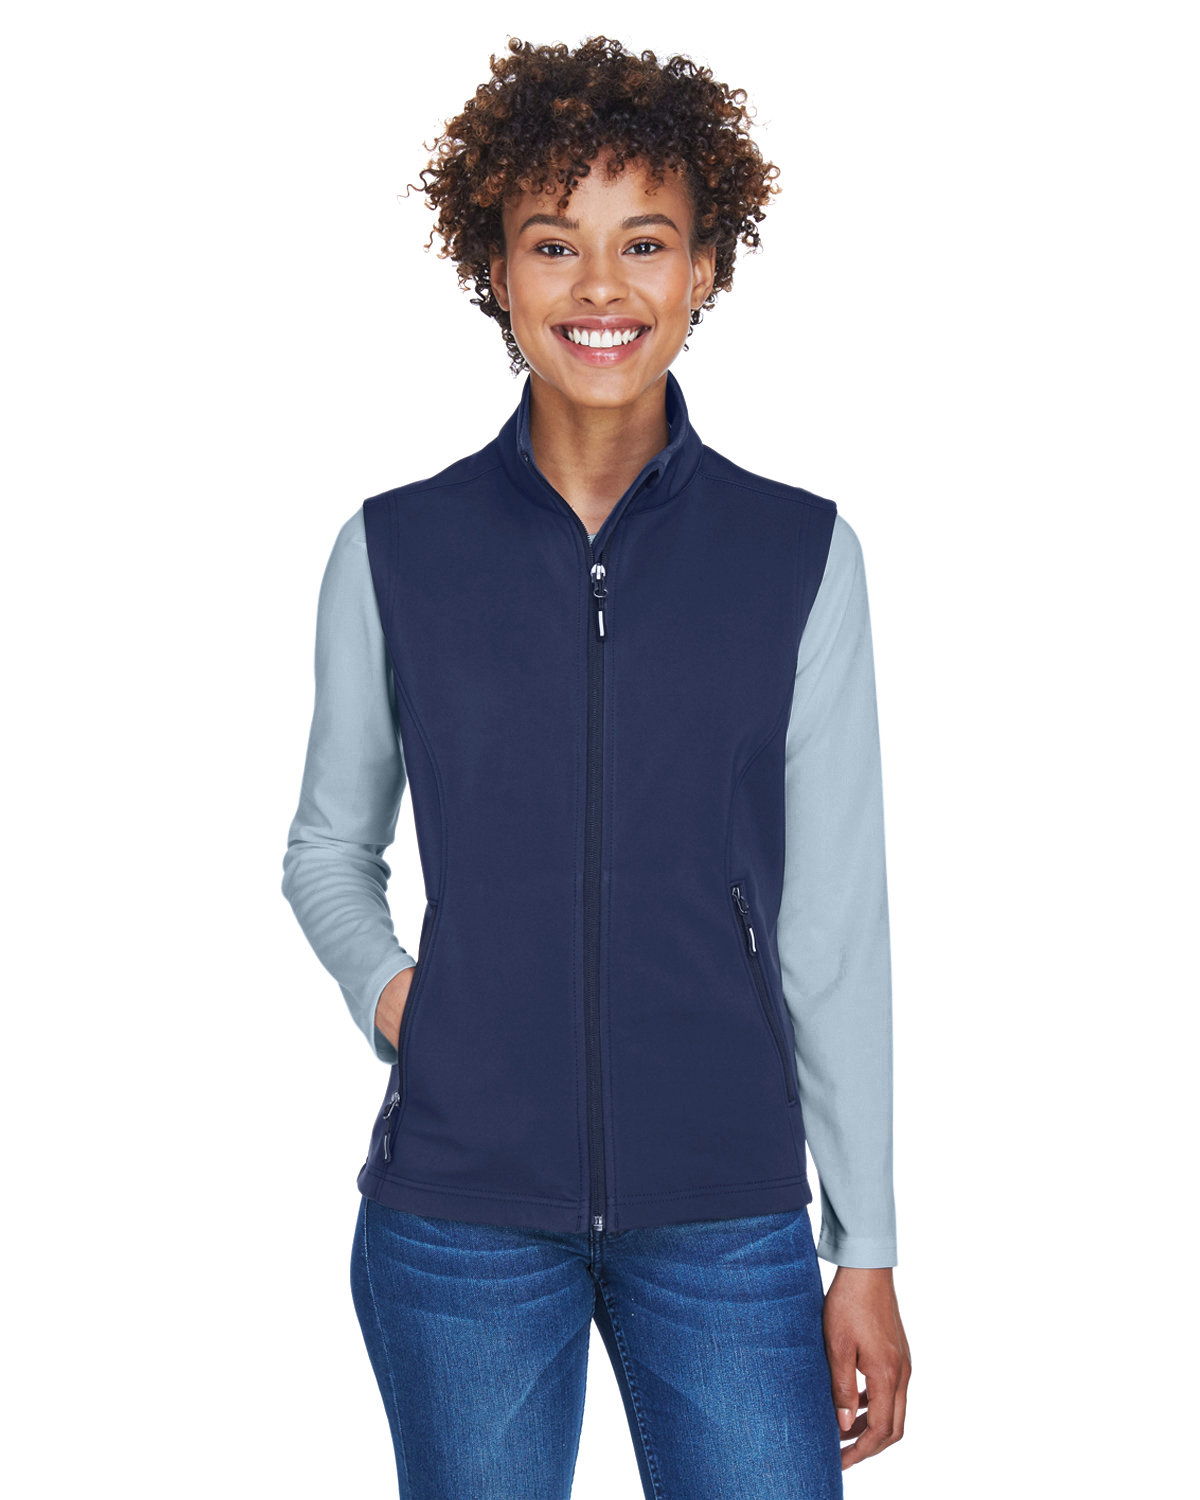 CORE365 Ladies' Cruise Two-Layer Fleece Bonded Soft Shell Vest classic navy 